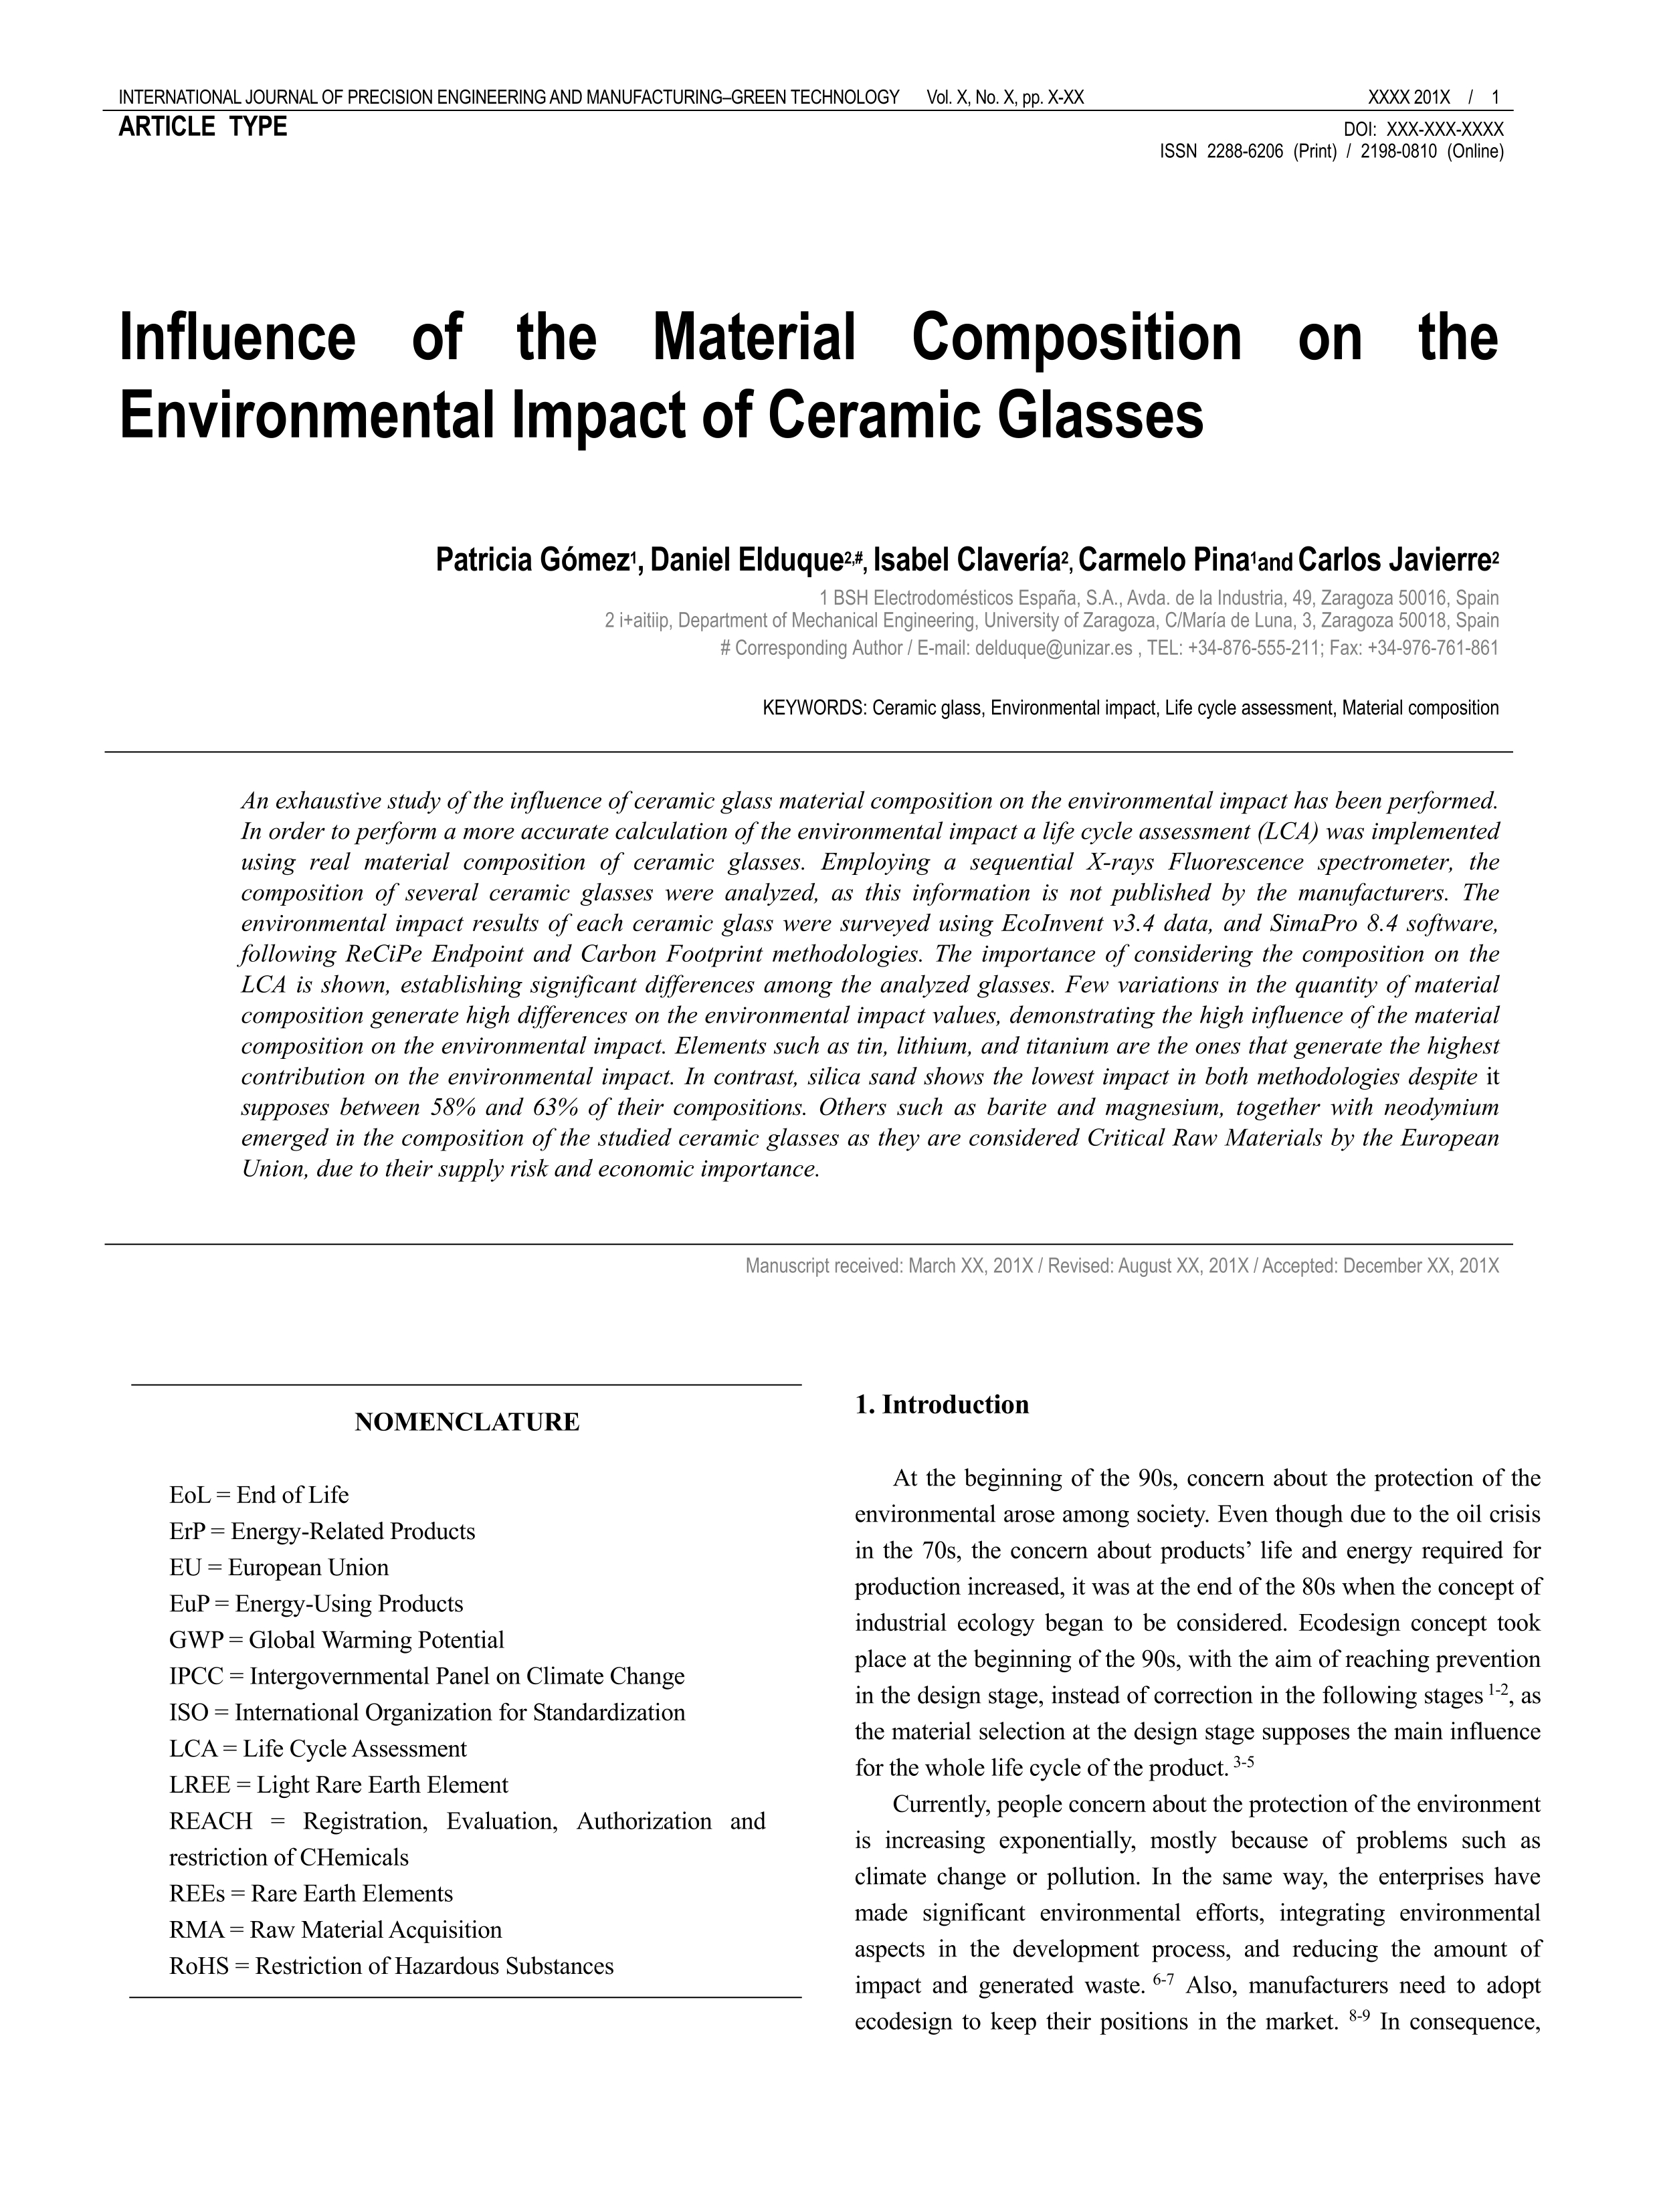 Influence of the material composition on the environmental impact of ceramic glasses